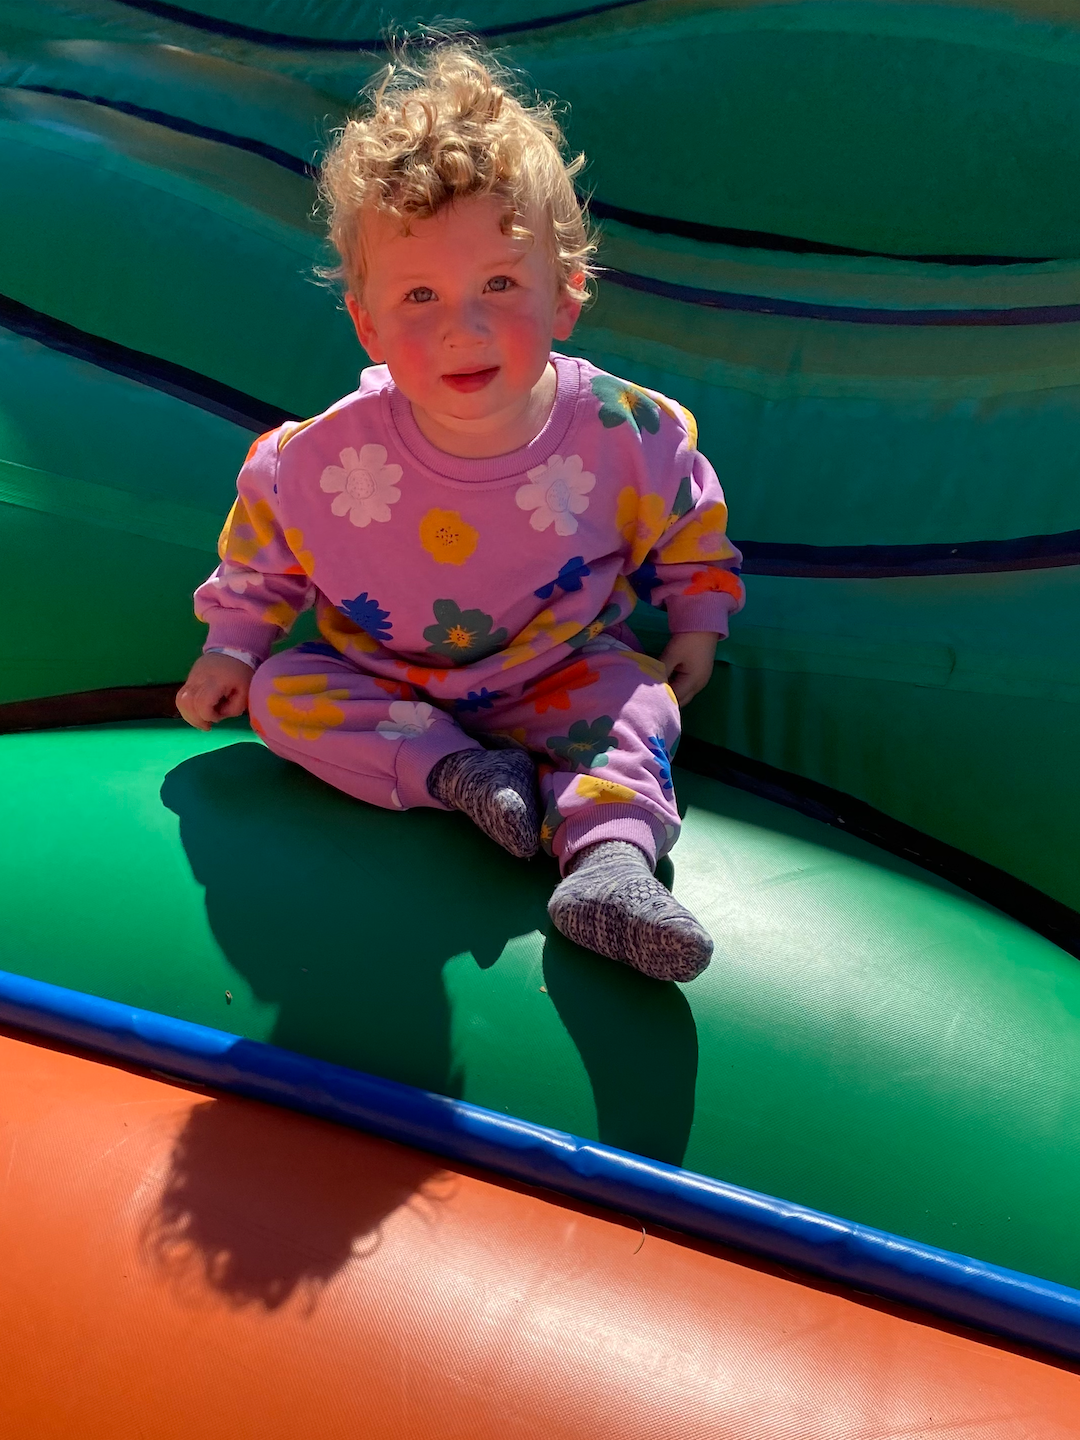 A toddler on a bouncy castle, wearing a kids' sweatshirt and pants set in purple, printed with yellow, orange, green, blue and white flowers